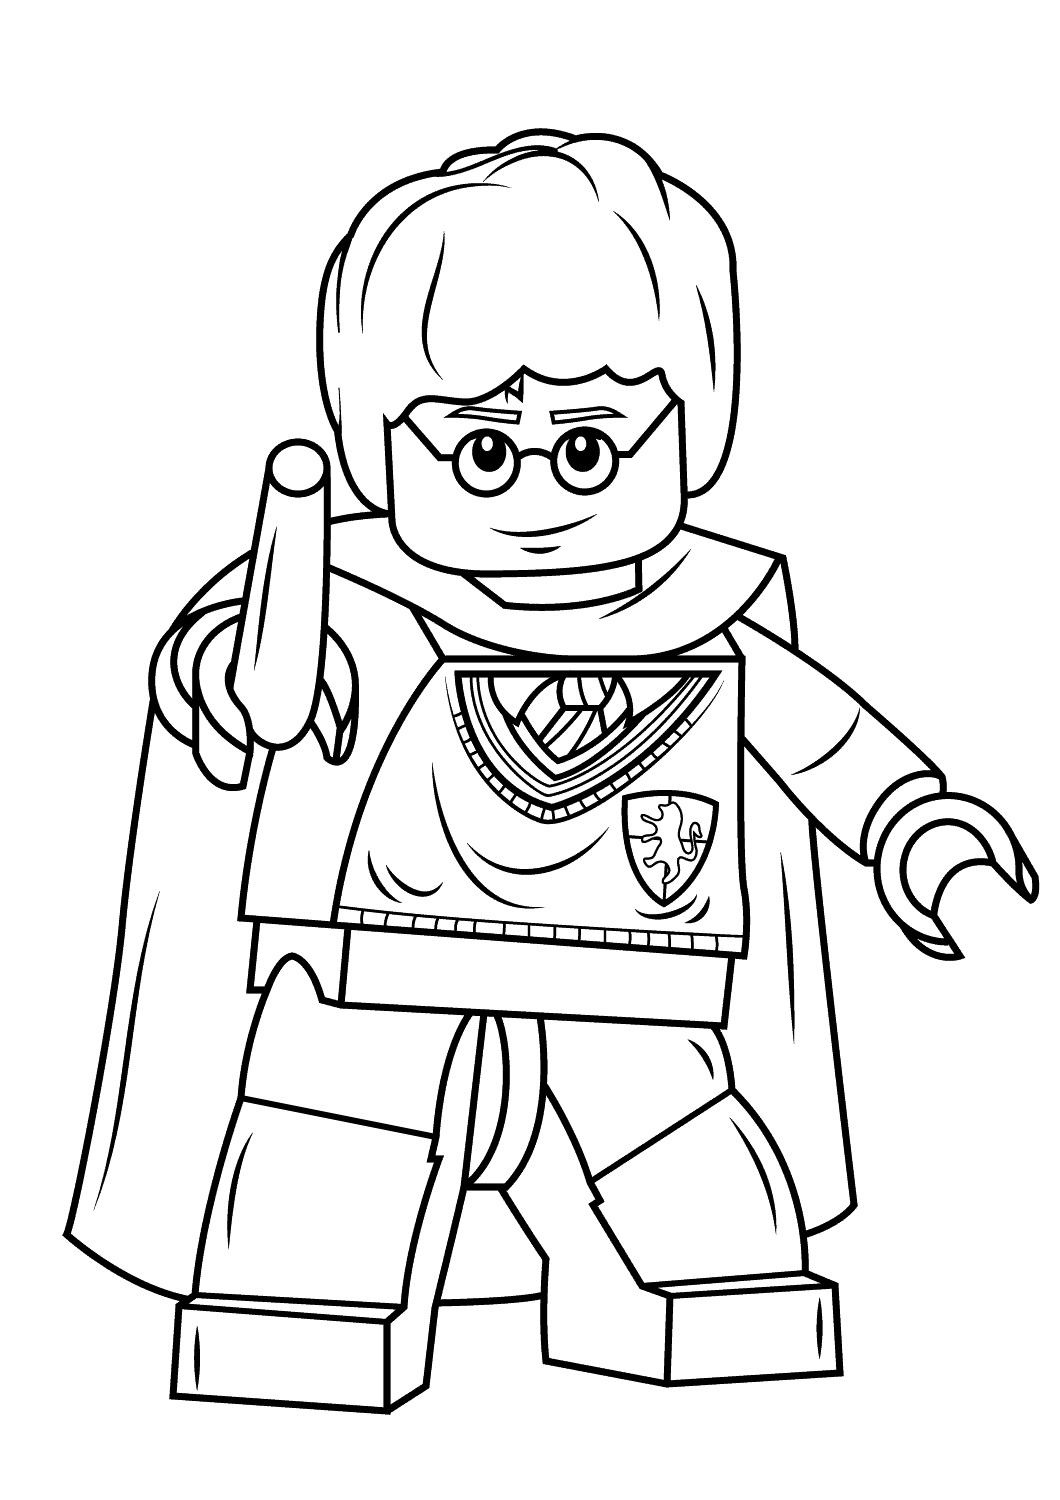 Lego Emmet Coloring Page - Free Coloring Pages Online